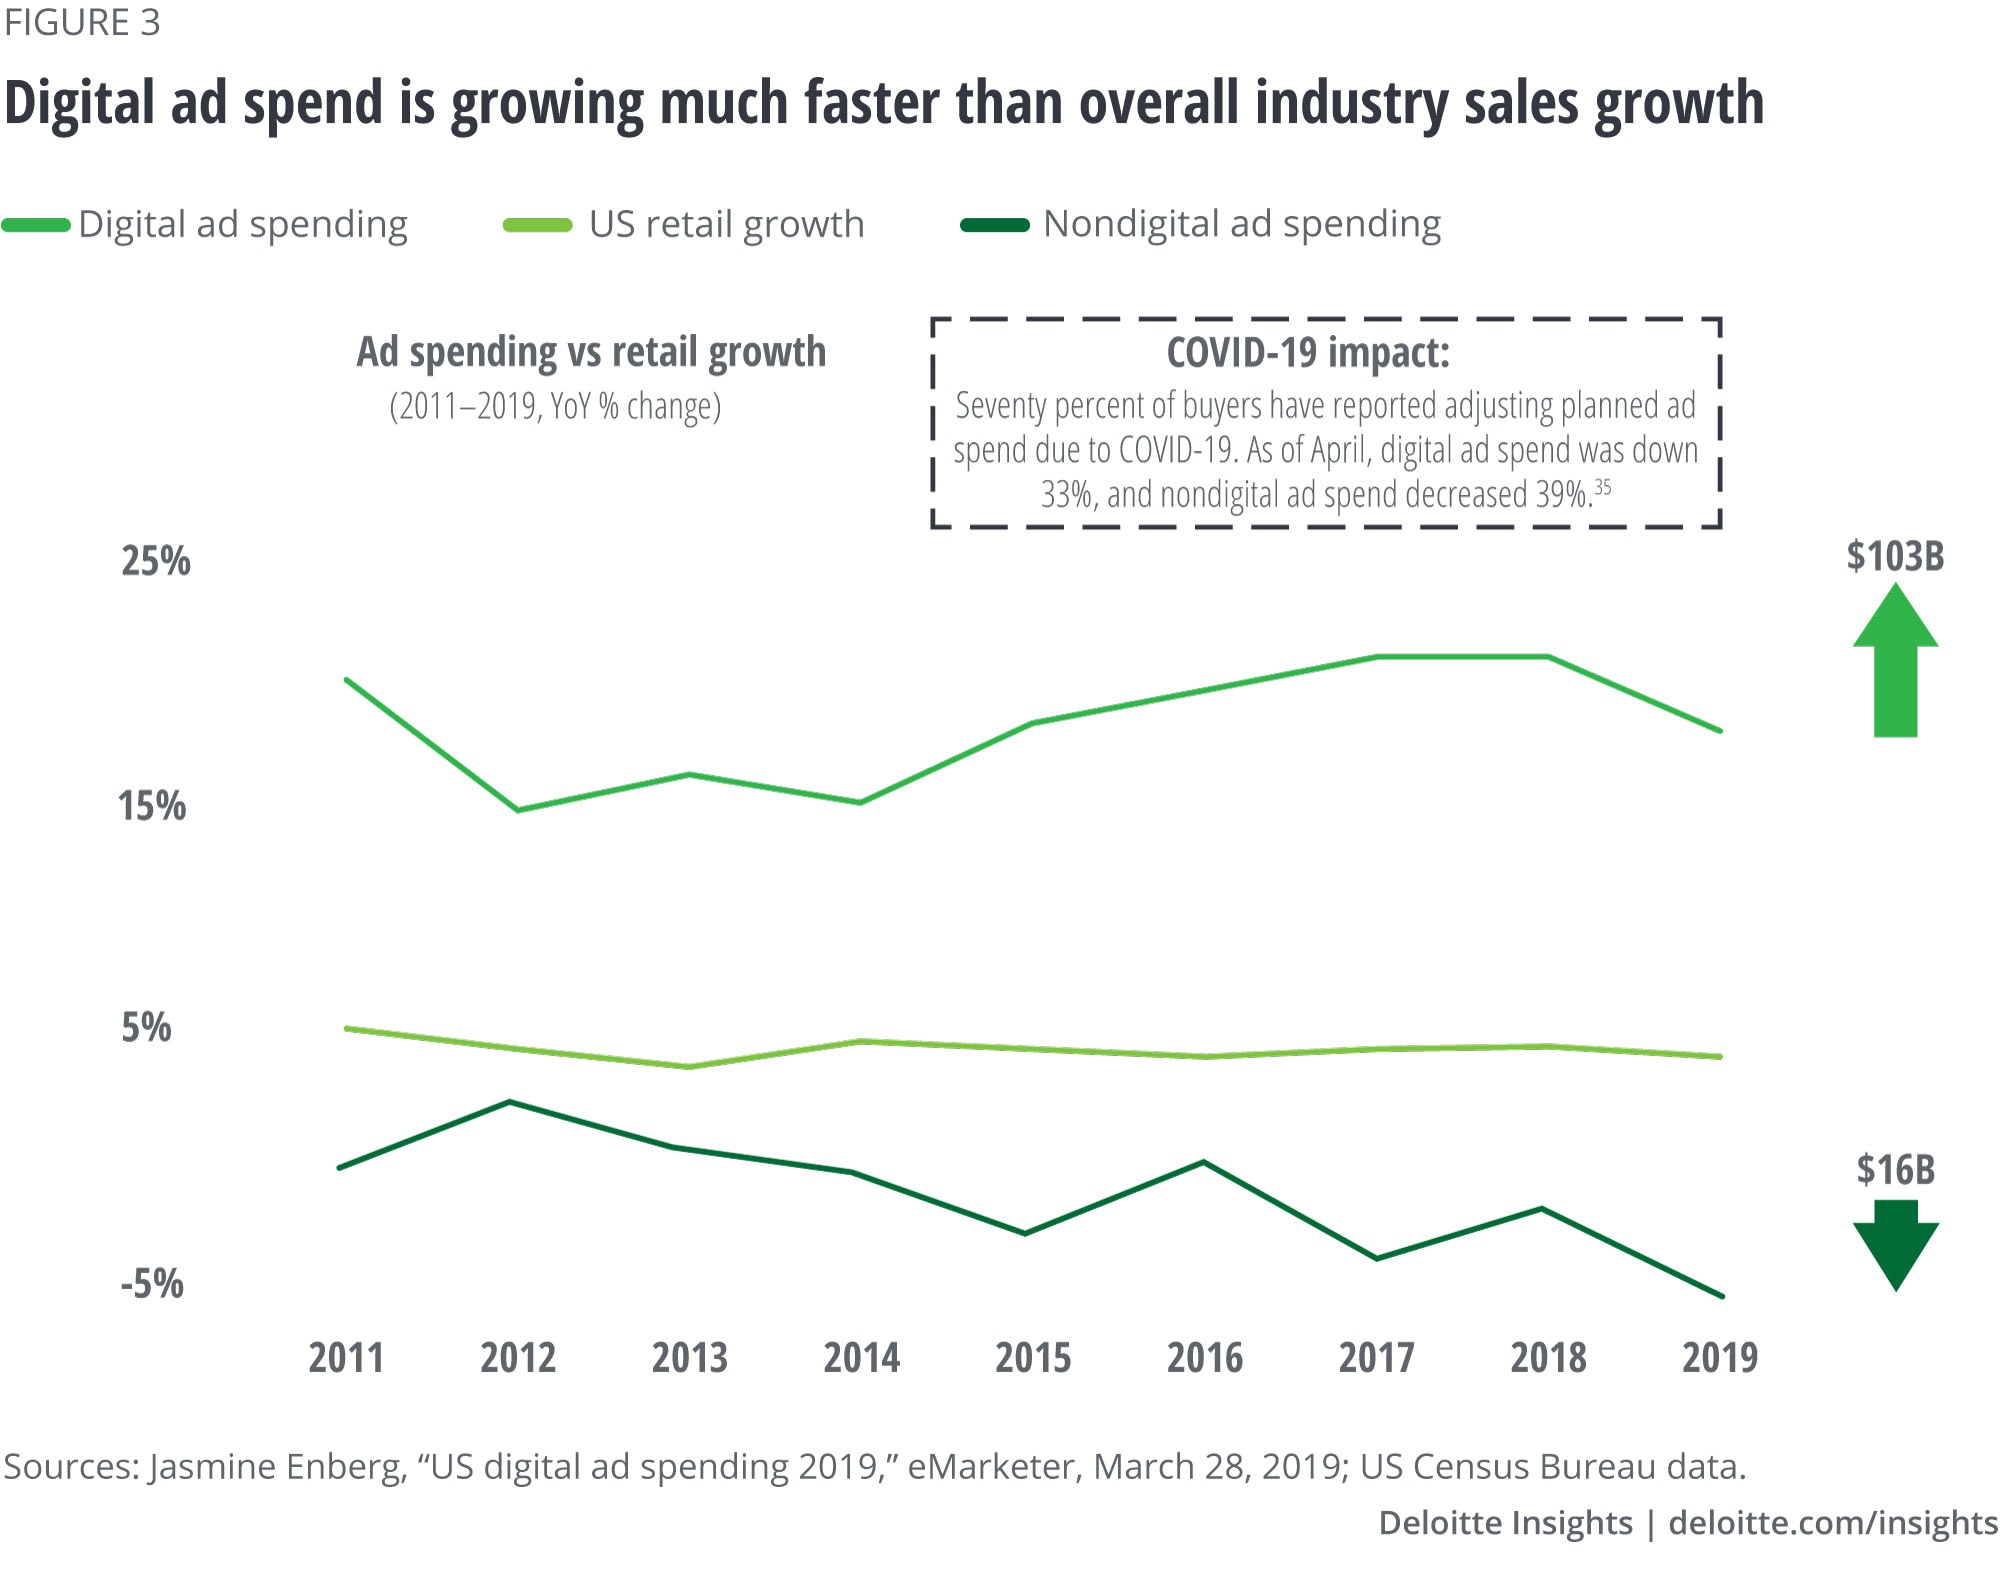 Digital ad spend is growing much faster than overall industry sales growth